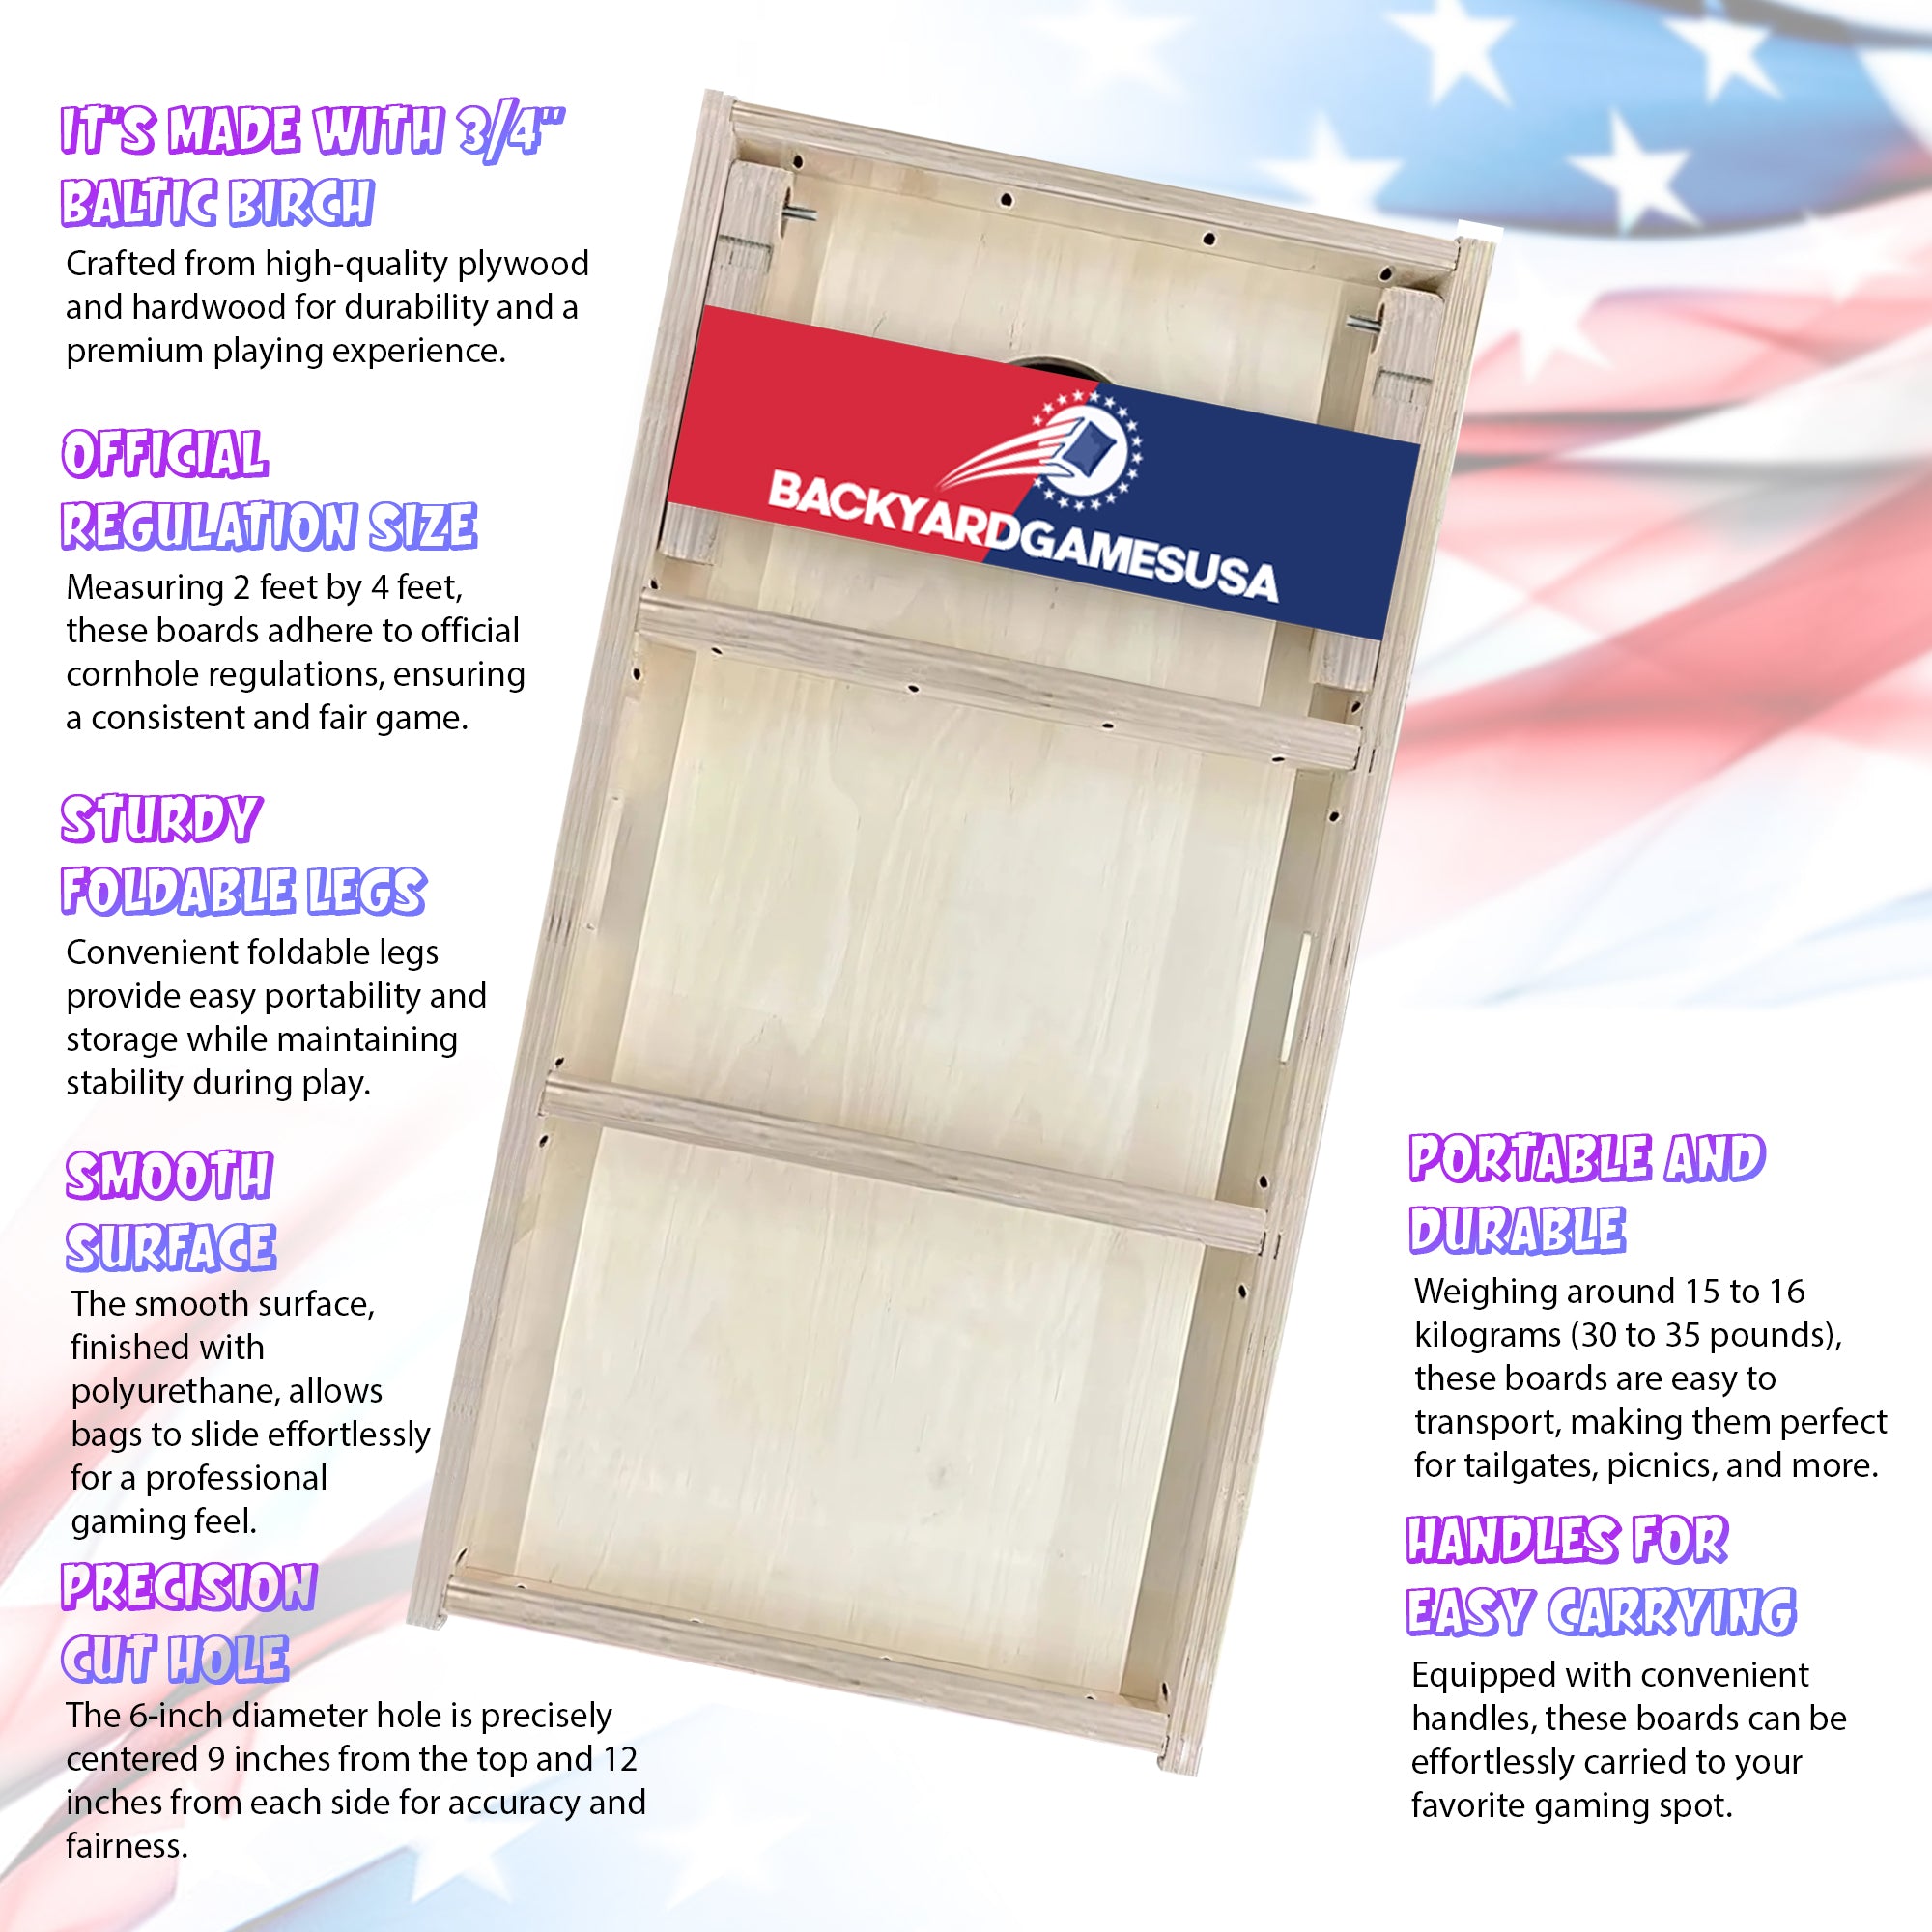 Soldier Daughter Flag Professional Cornhole Boards